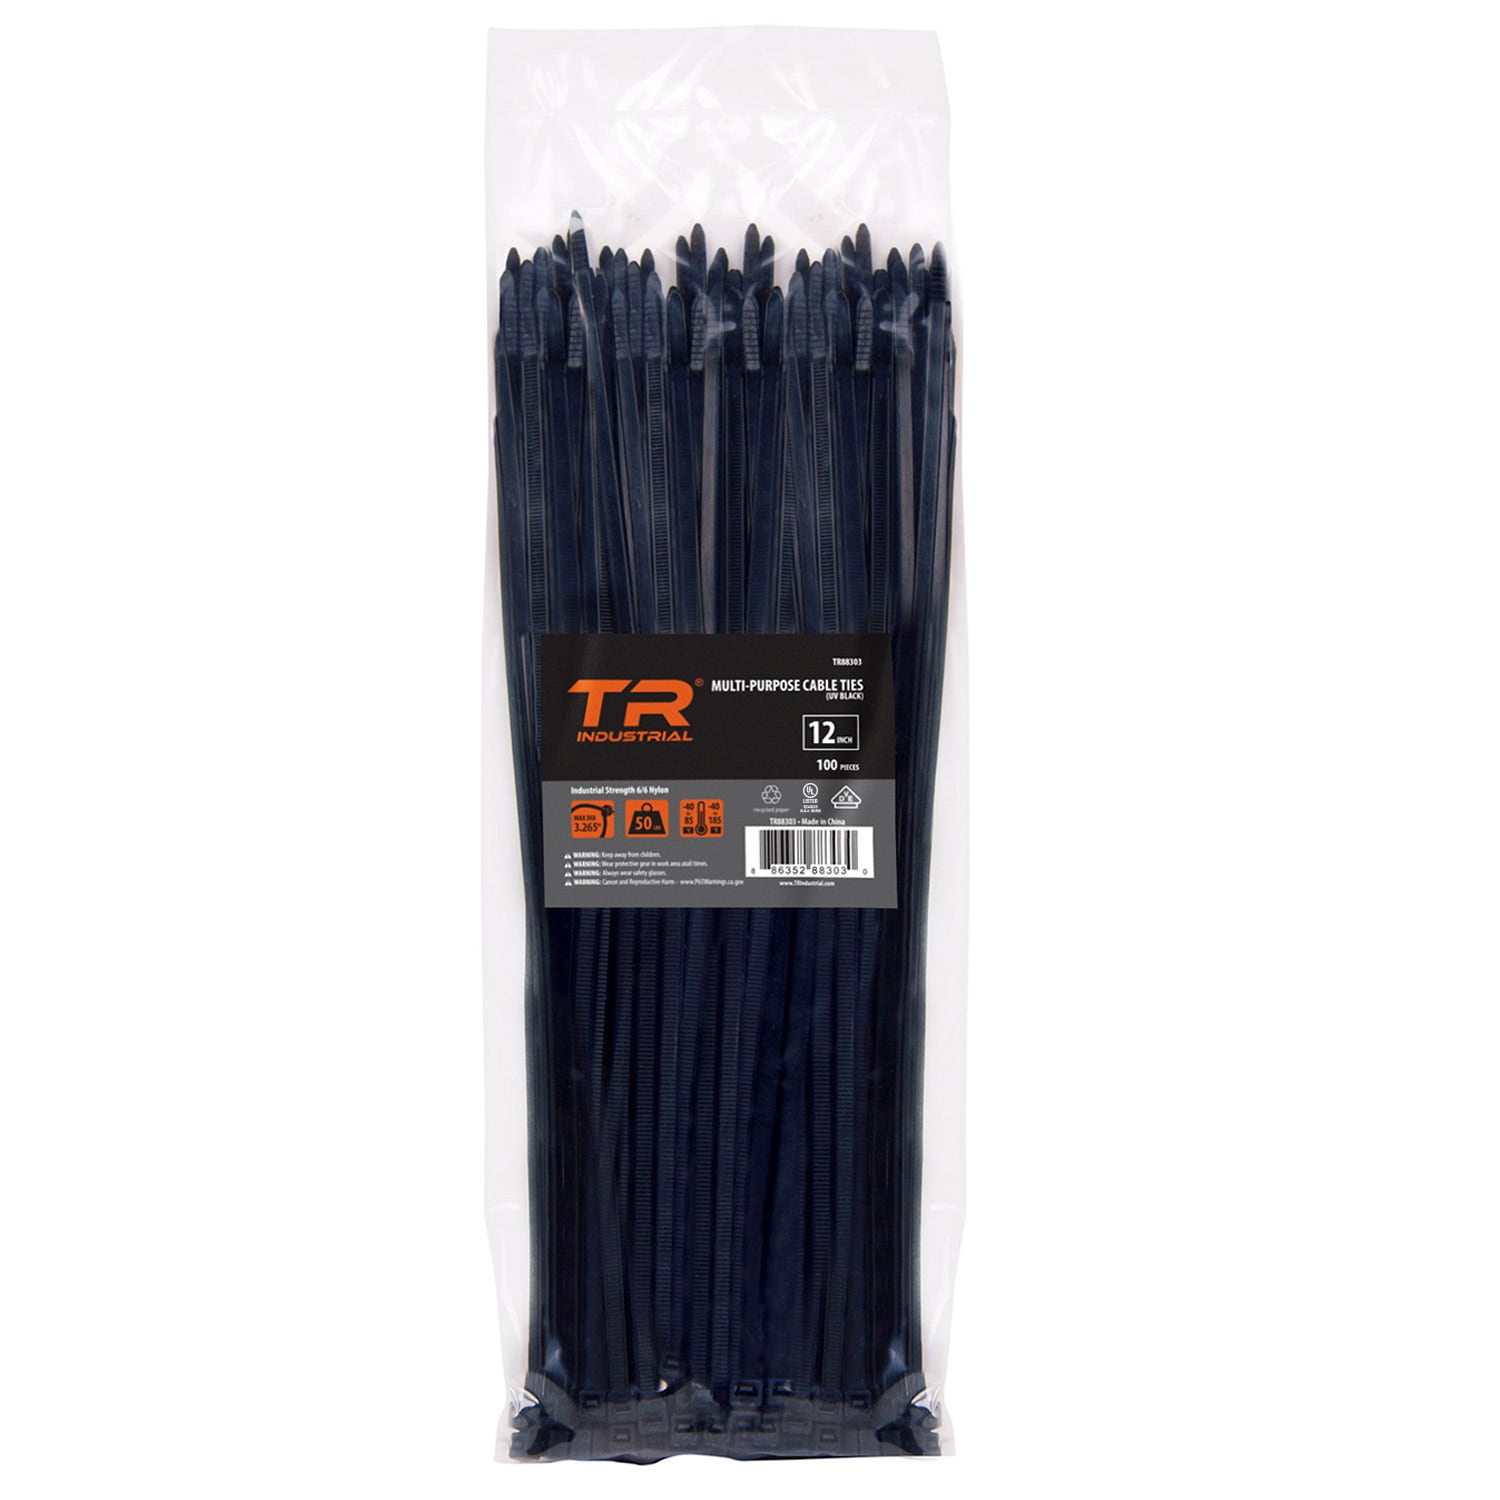 Utilitech Multiple Sizes Nylon Zip Ties Multiple Colors/Finishes (500-Pack)  in the Cable Zip Ties department at